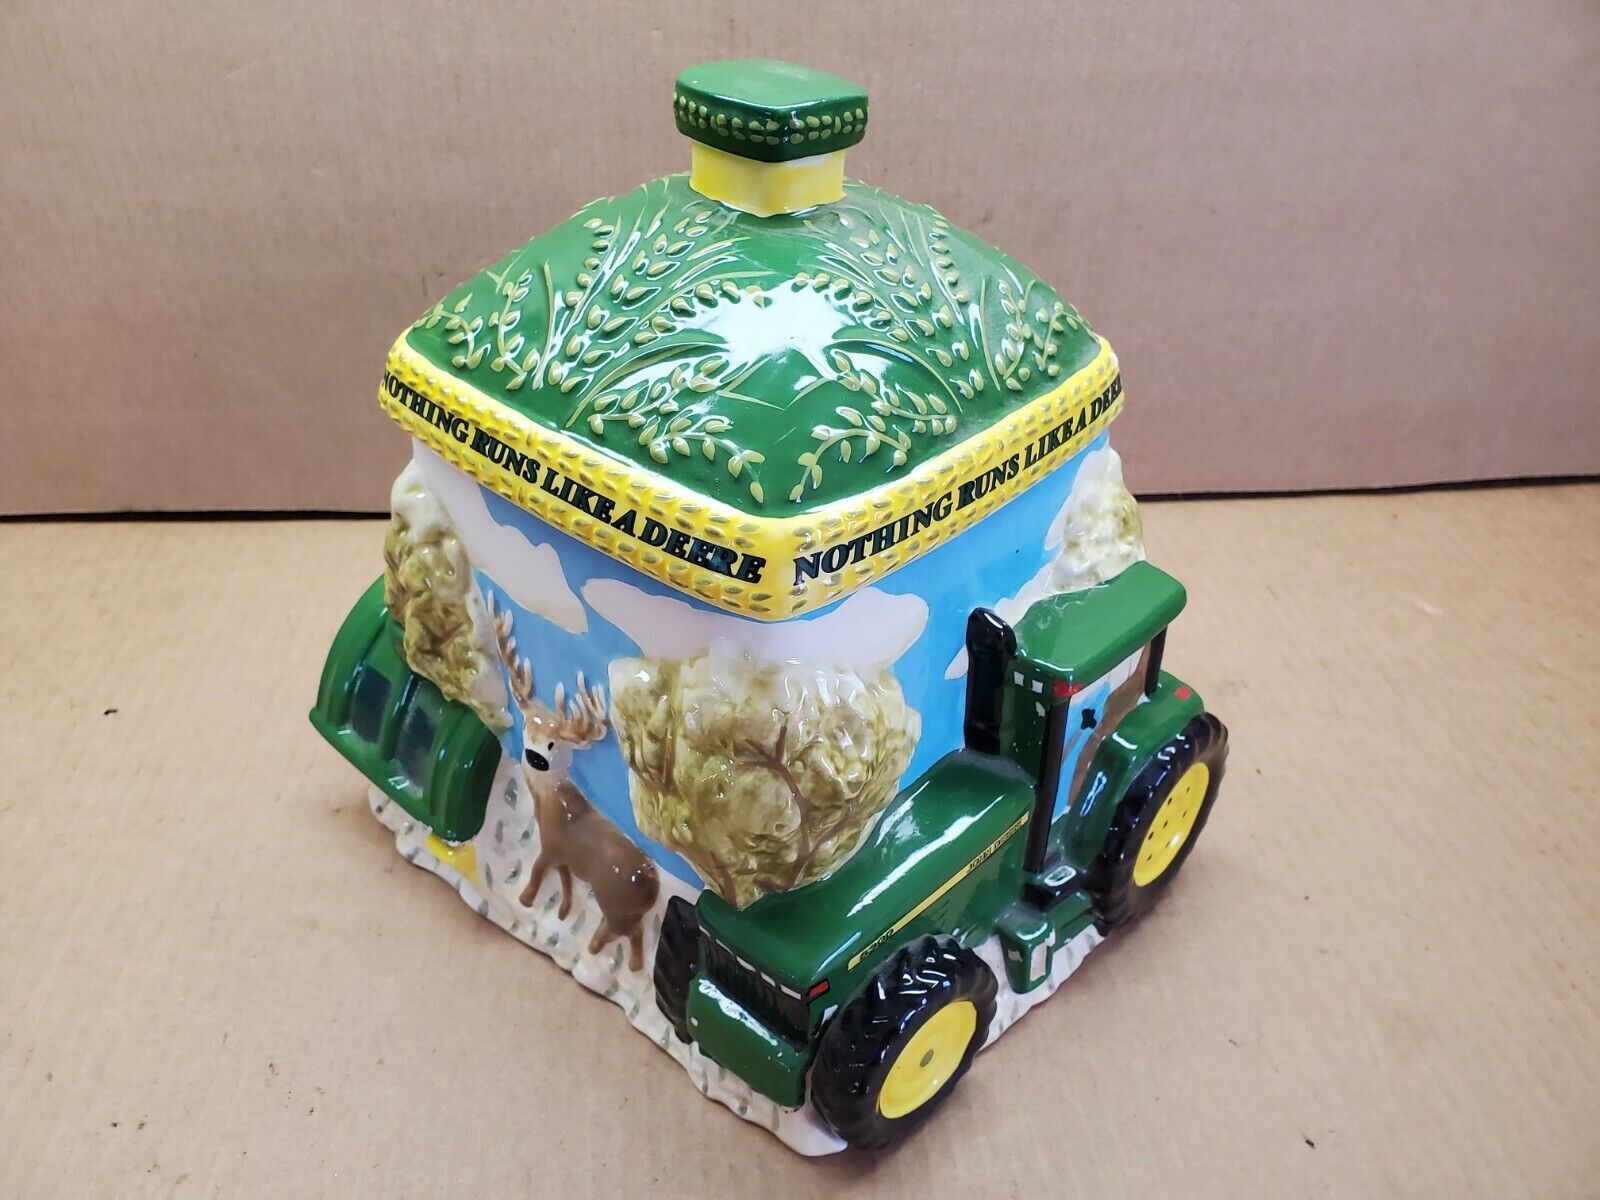 John Deere Ceramic Cookie Jar Container – Gibson USA Excellent Condition!